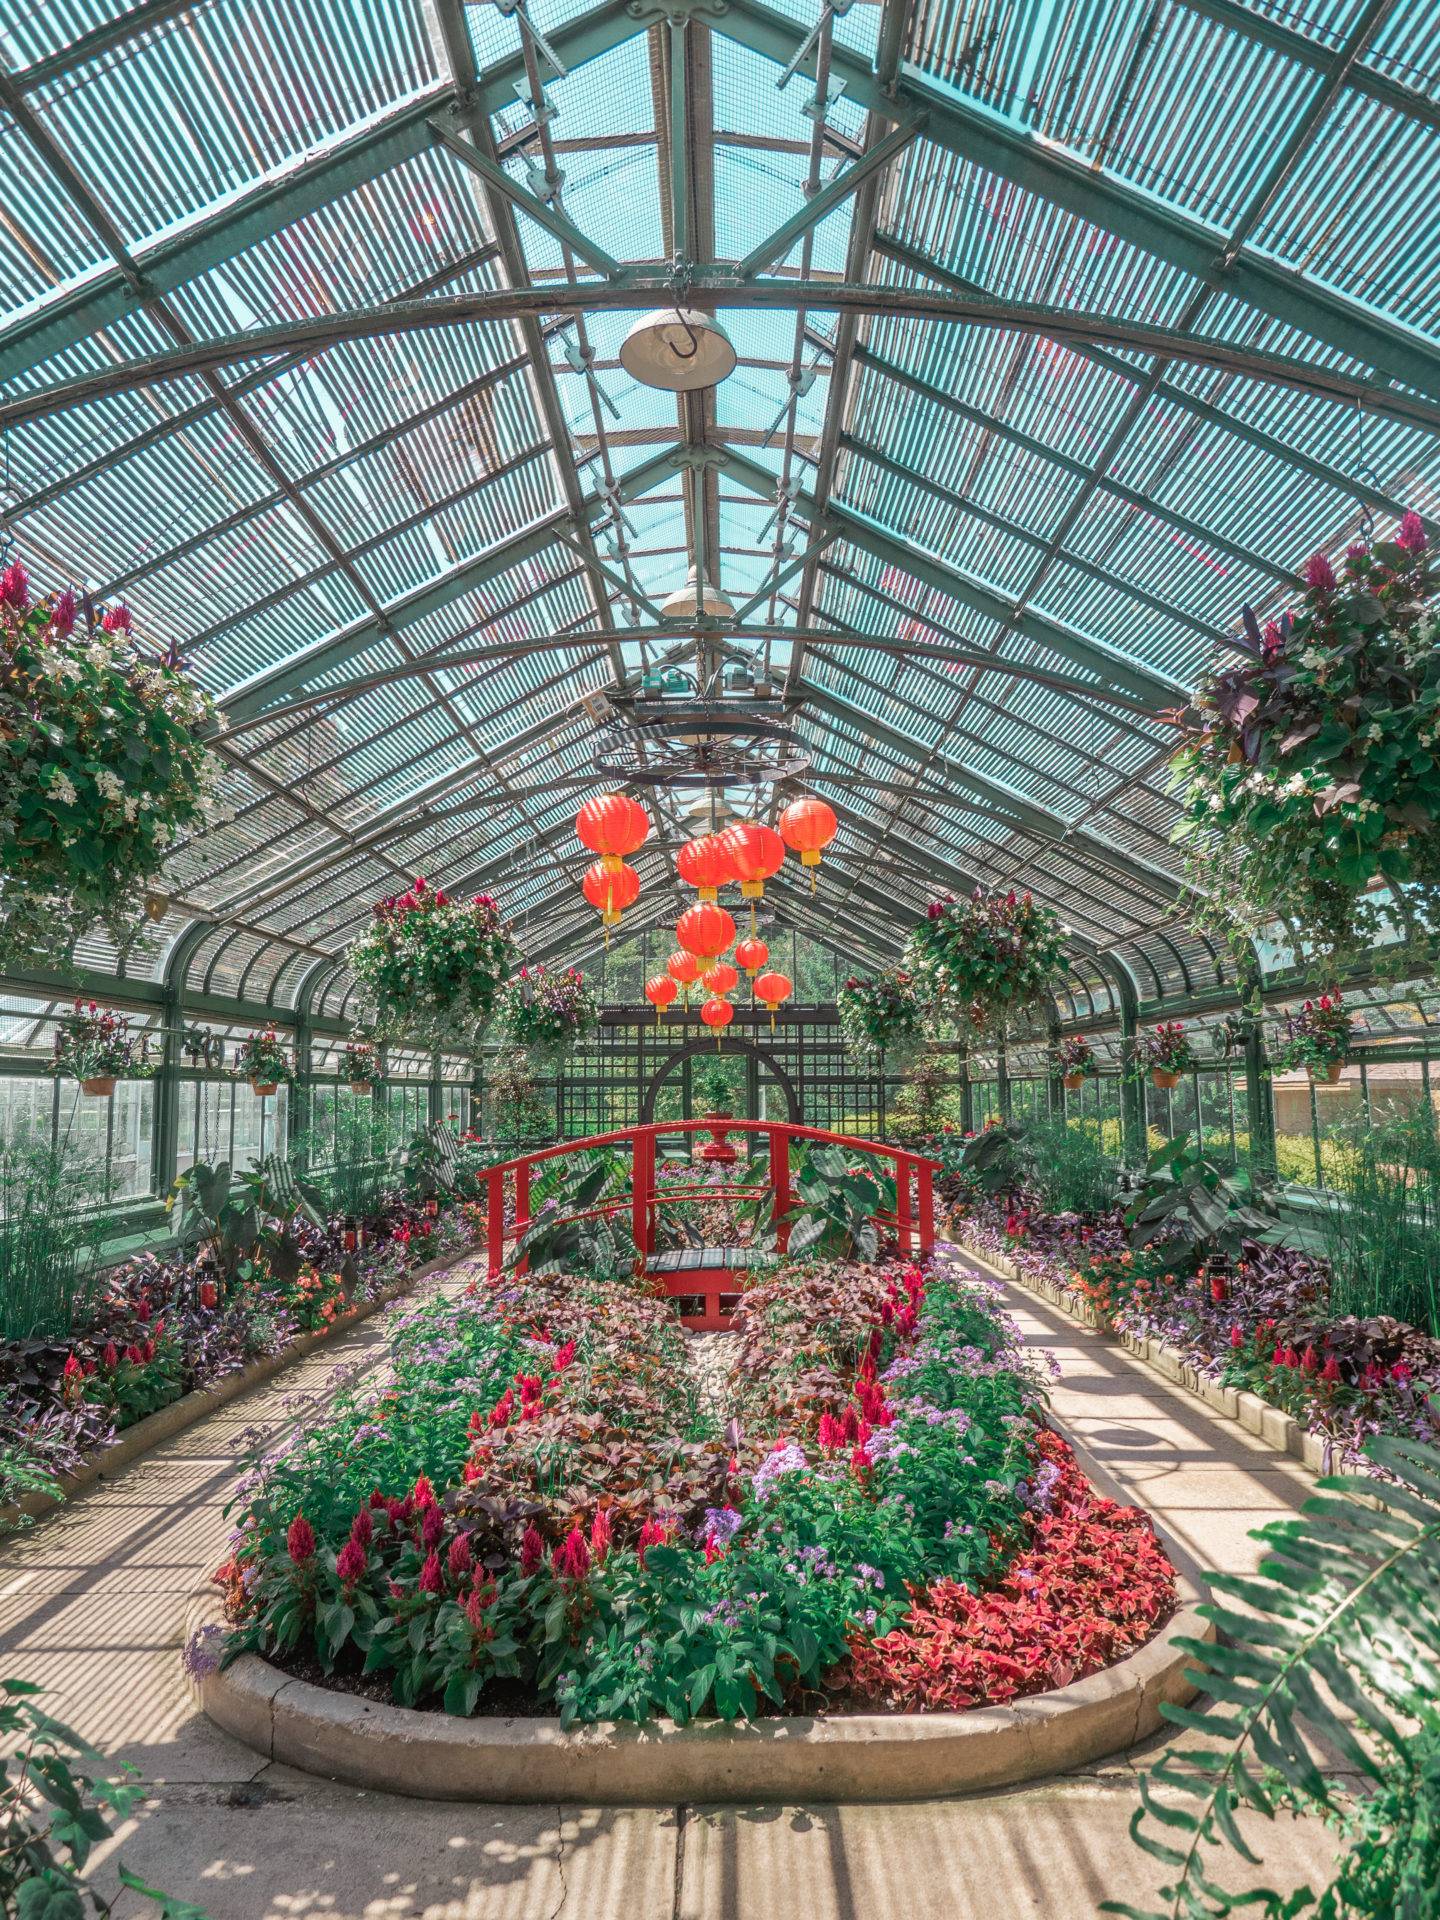 Planning a trip to Niagara Falls, Canada soon? You won't want to miss this guide of incredible things to do in Niagara Falls! From amazing restaurants, to the butterfly conservatory, bowling, and even a speedway... There is so much more to do here than just the falls themselves. Click for the full guide! Pictured here: The Floral Showhouse